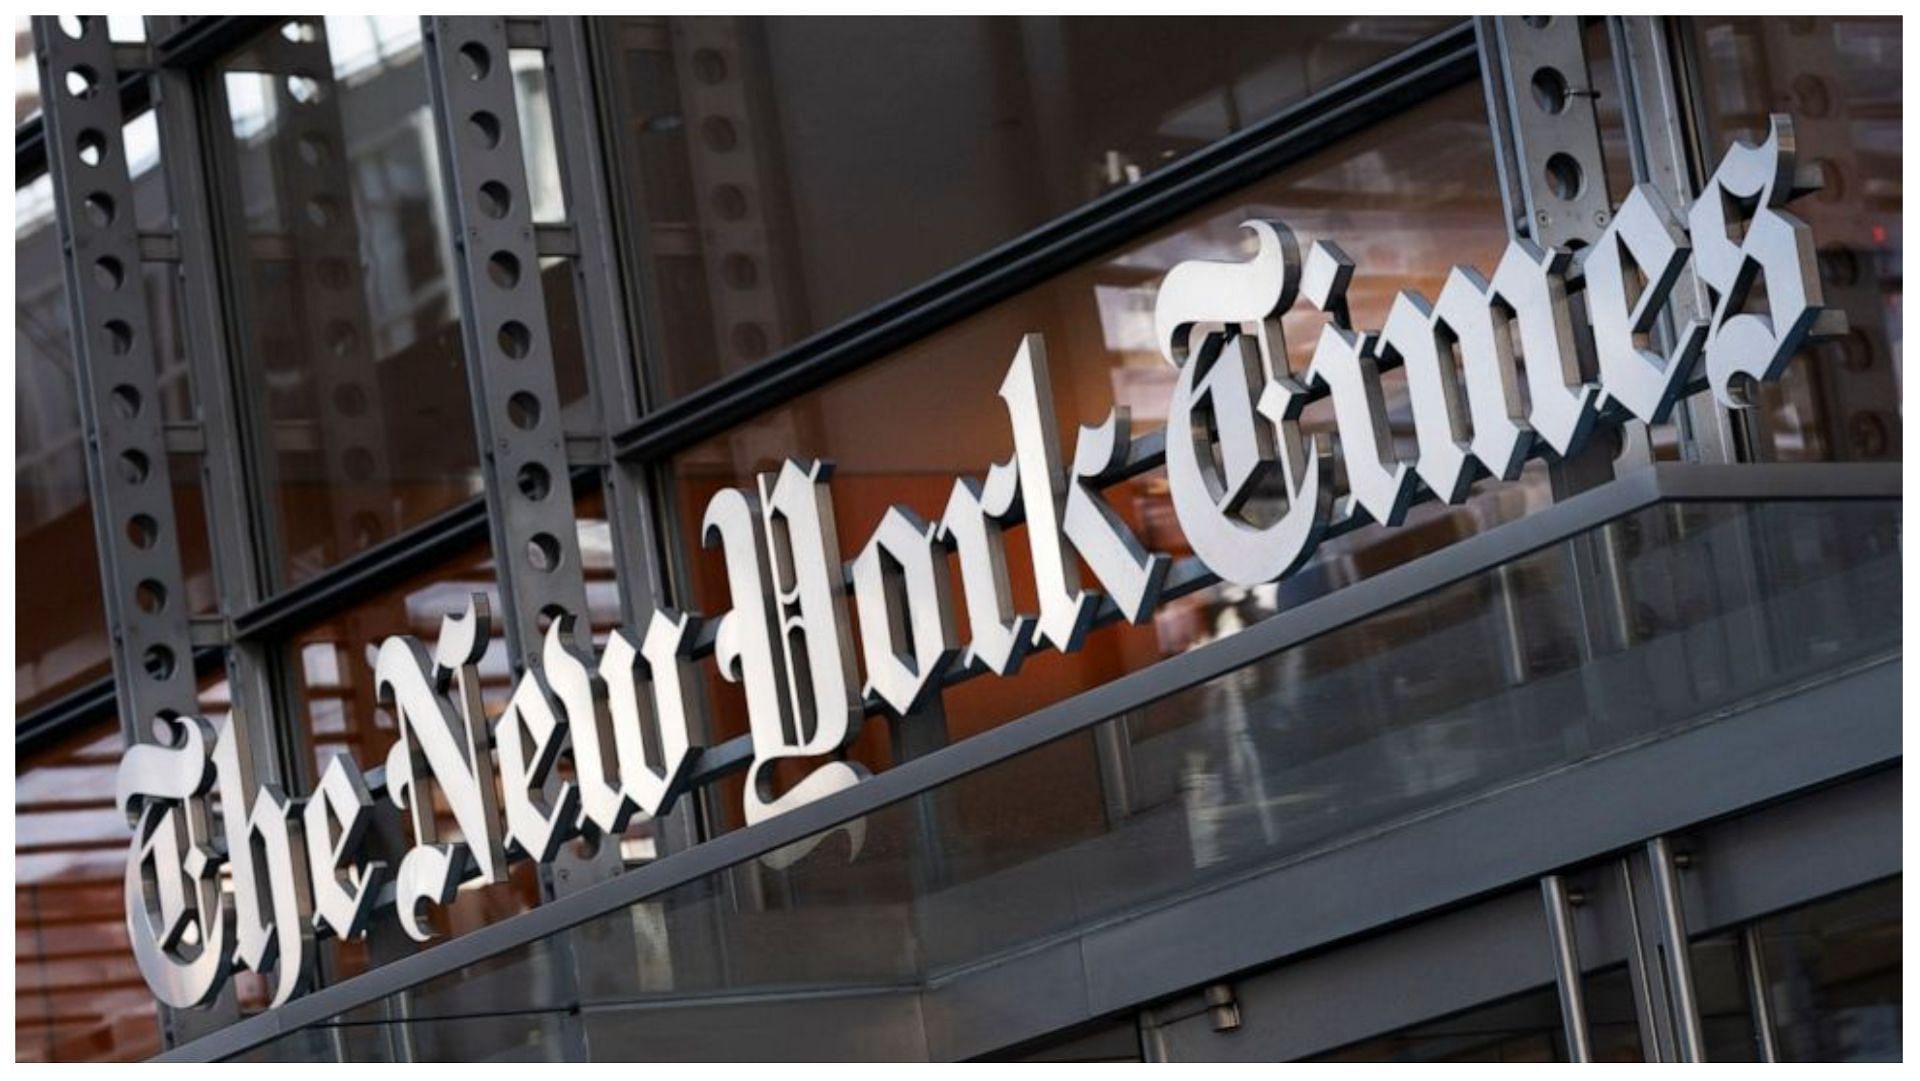 The New York Times is facing major backlash for its article on cannibalism (Image via AFP photos)